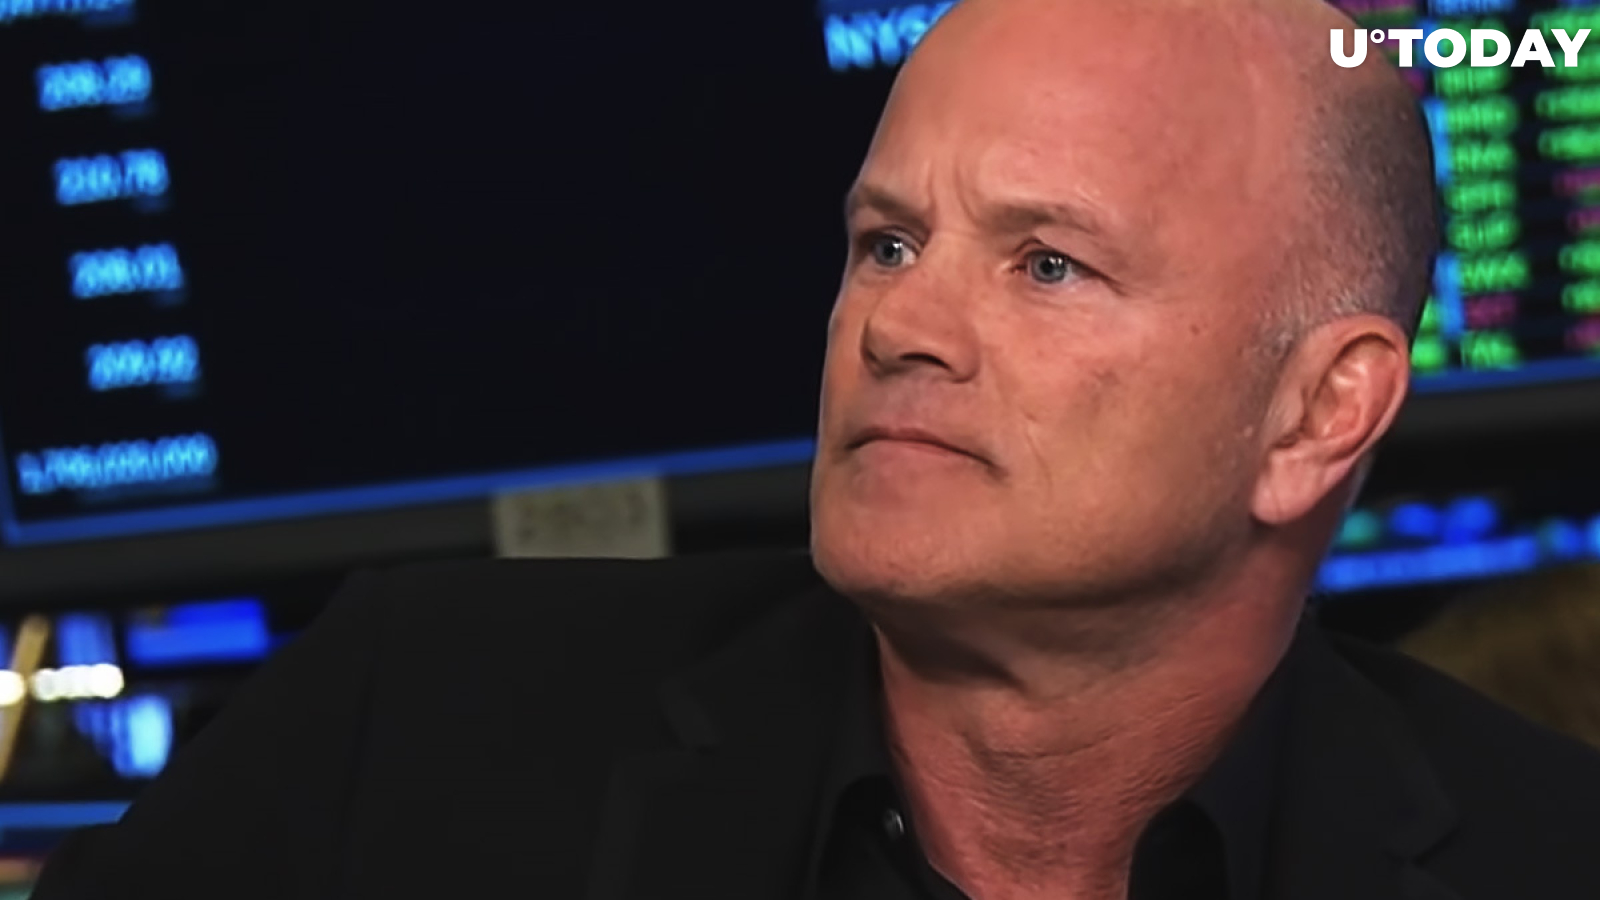 Mike Novogratz Says It's Going to Take a While for Bitcoin and Ethereum to Recover